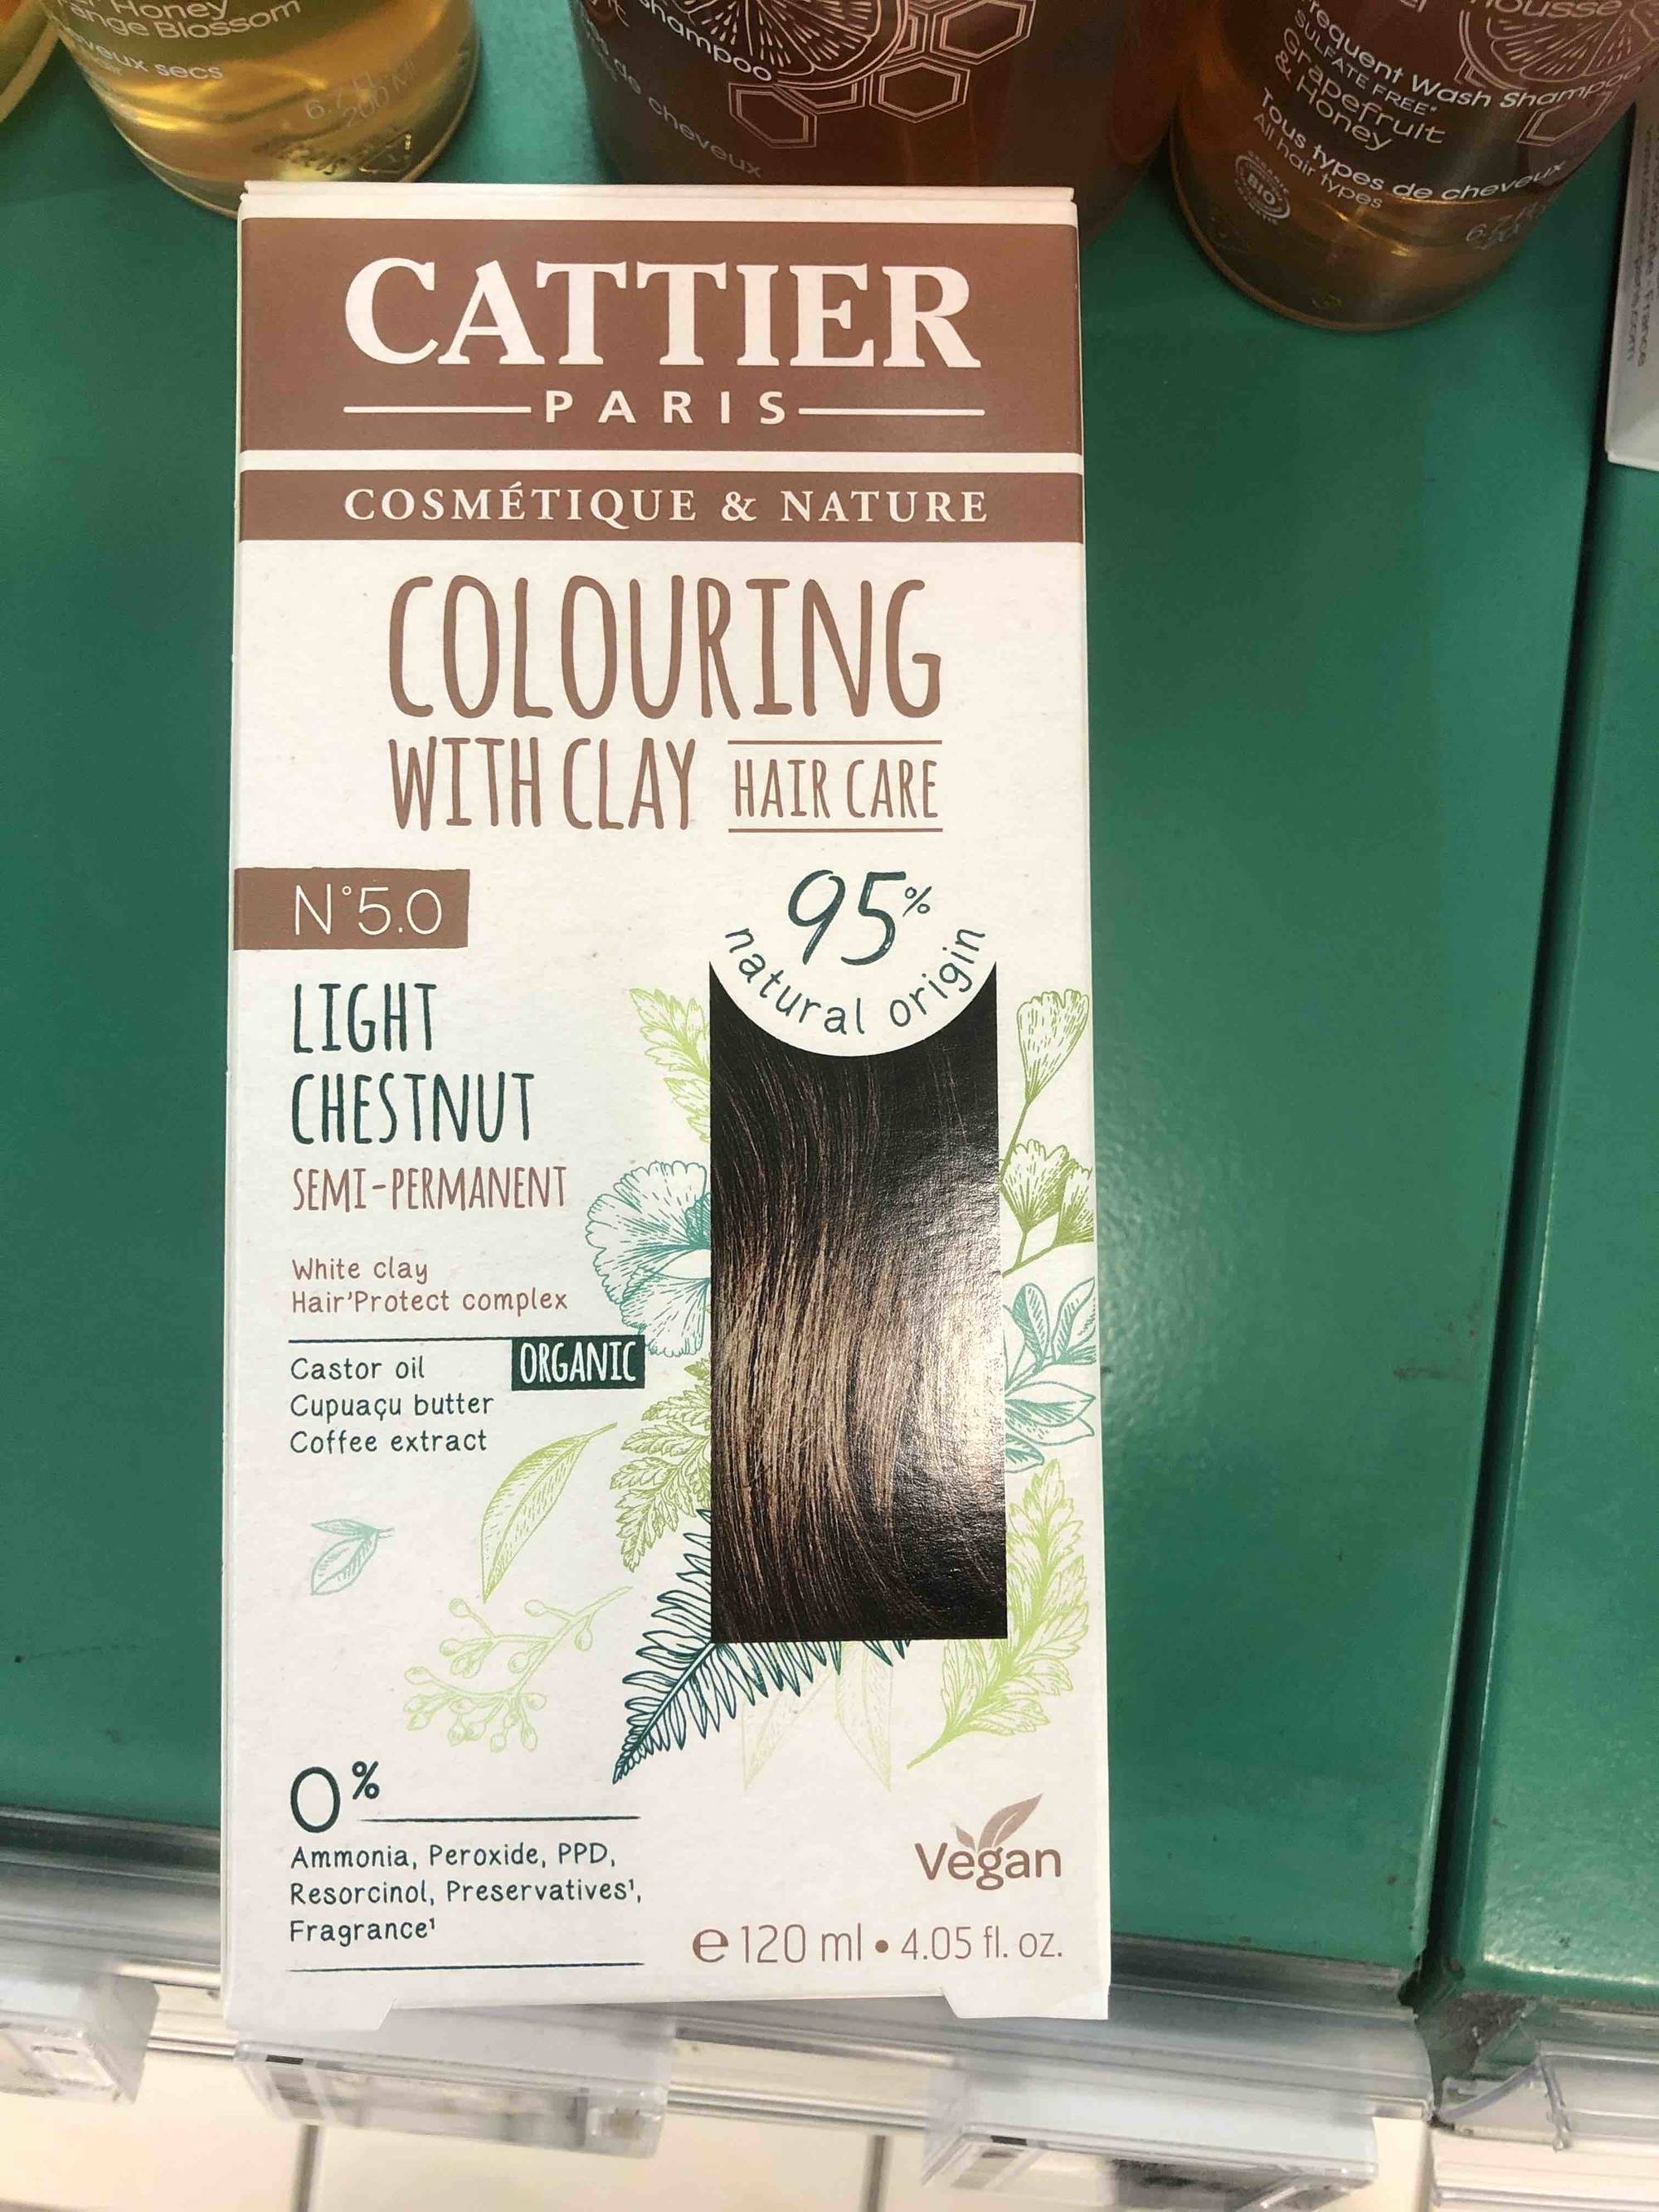 CATTIER - Colouring with clay hair care N° 50 Light chestnut